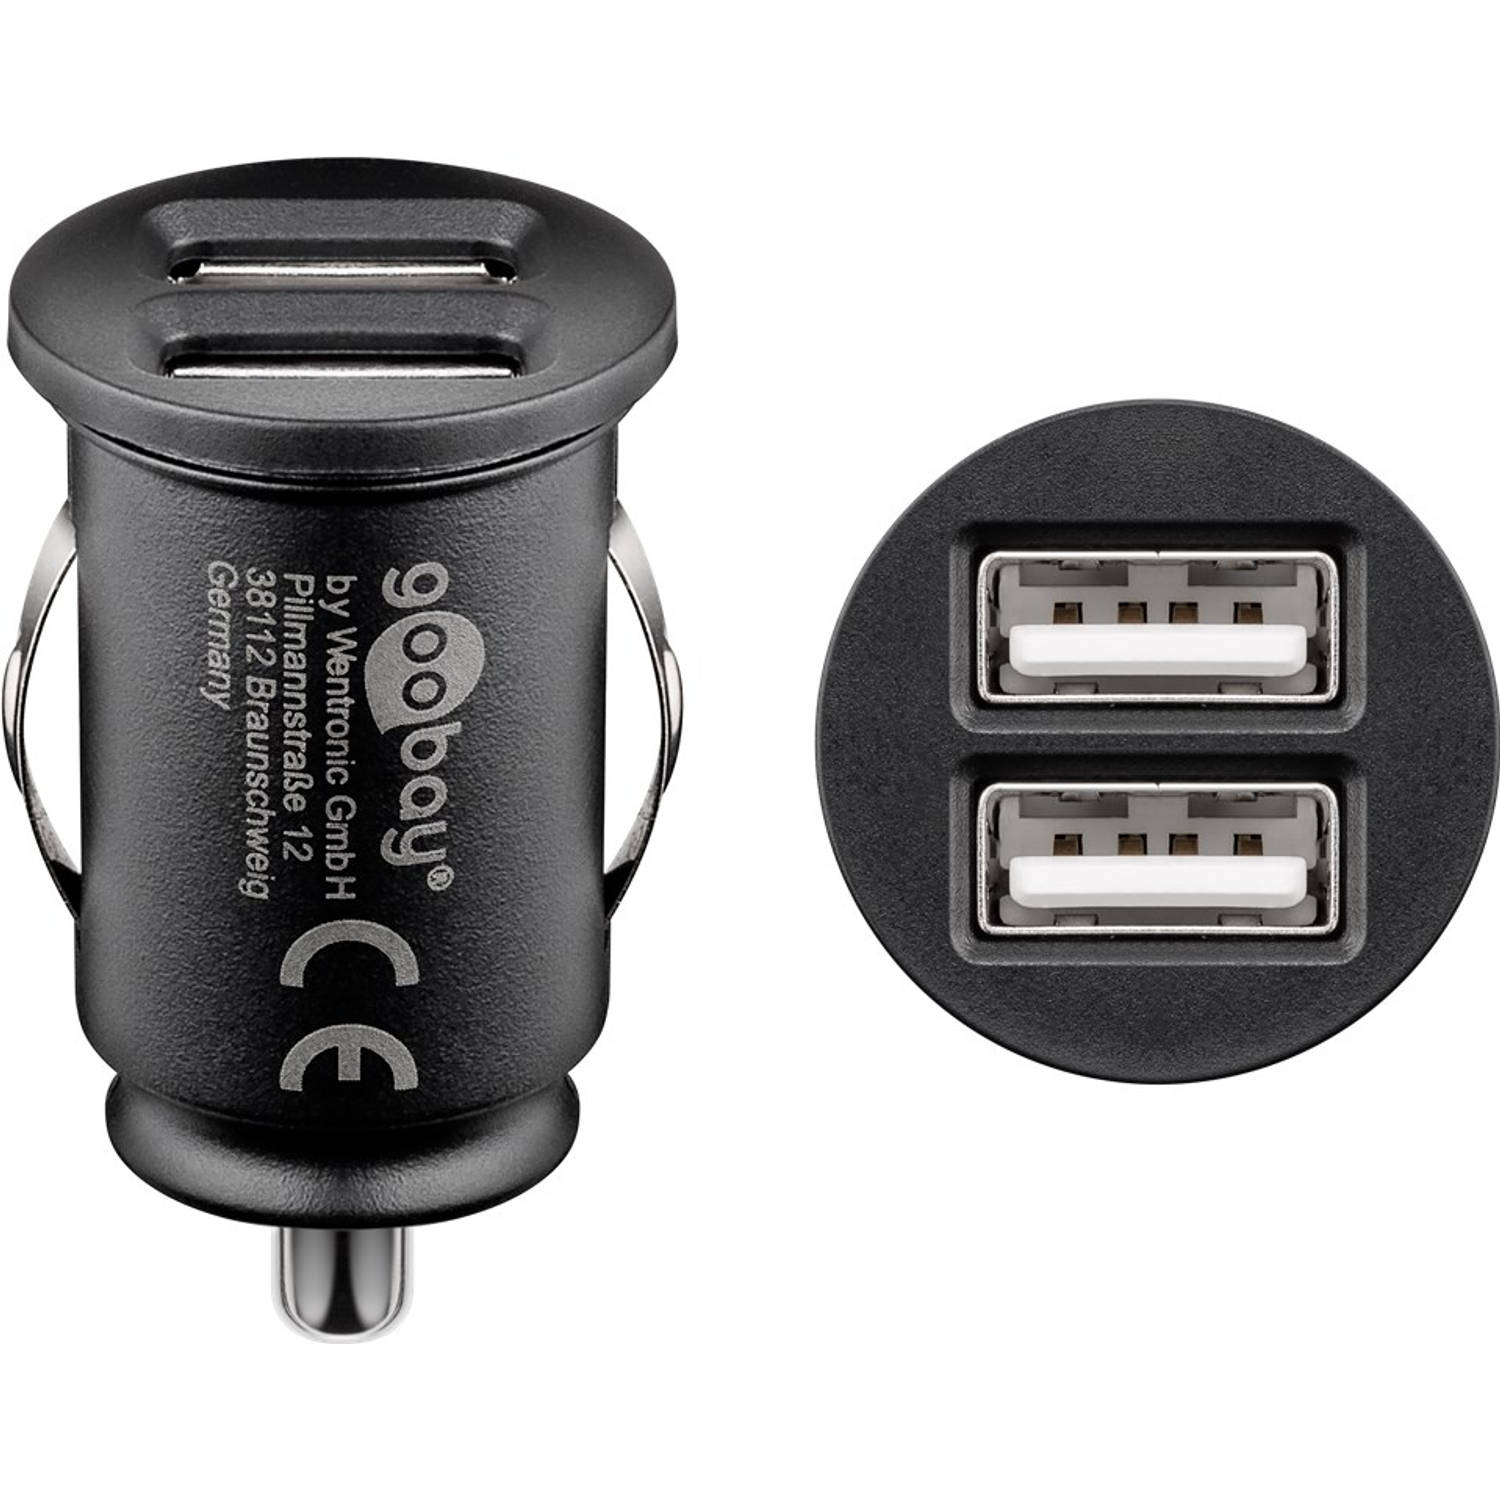 Dual USB car charger 2.0A Compact power supply for mobiles-small devic